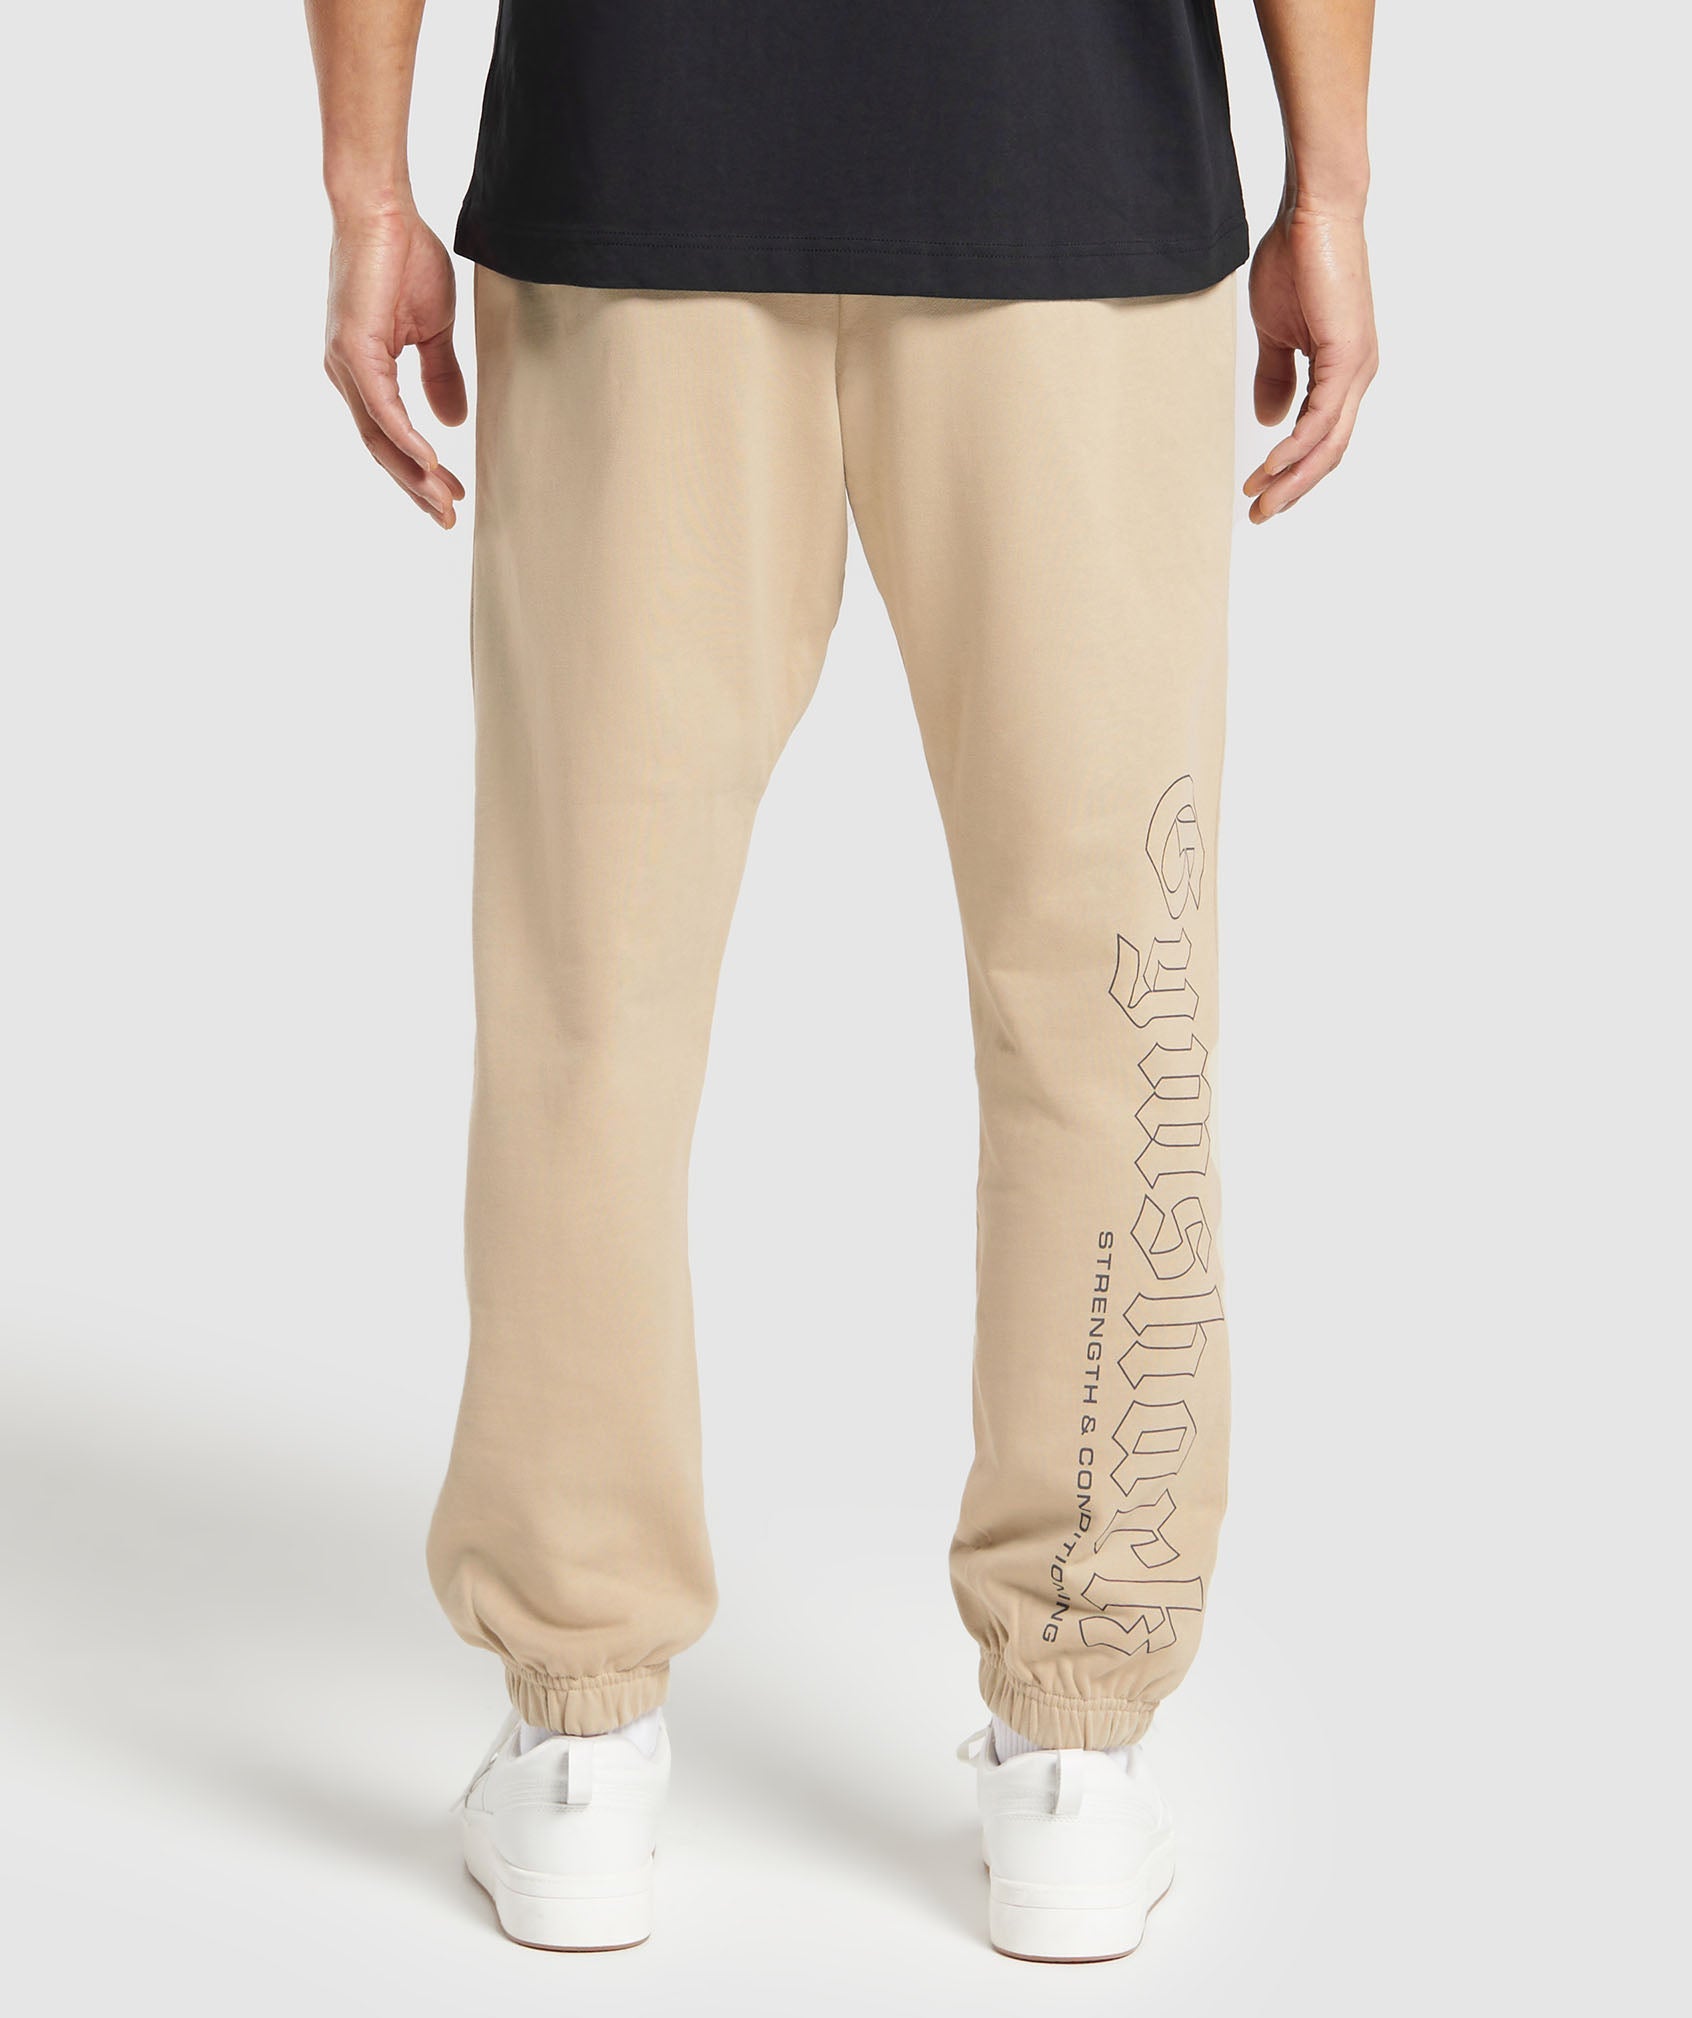 Strength and Conditioning Joggers in Vanilla Beige - view 1